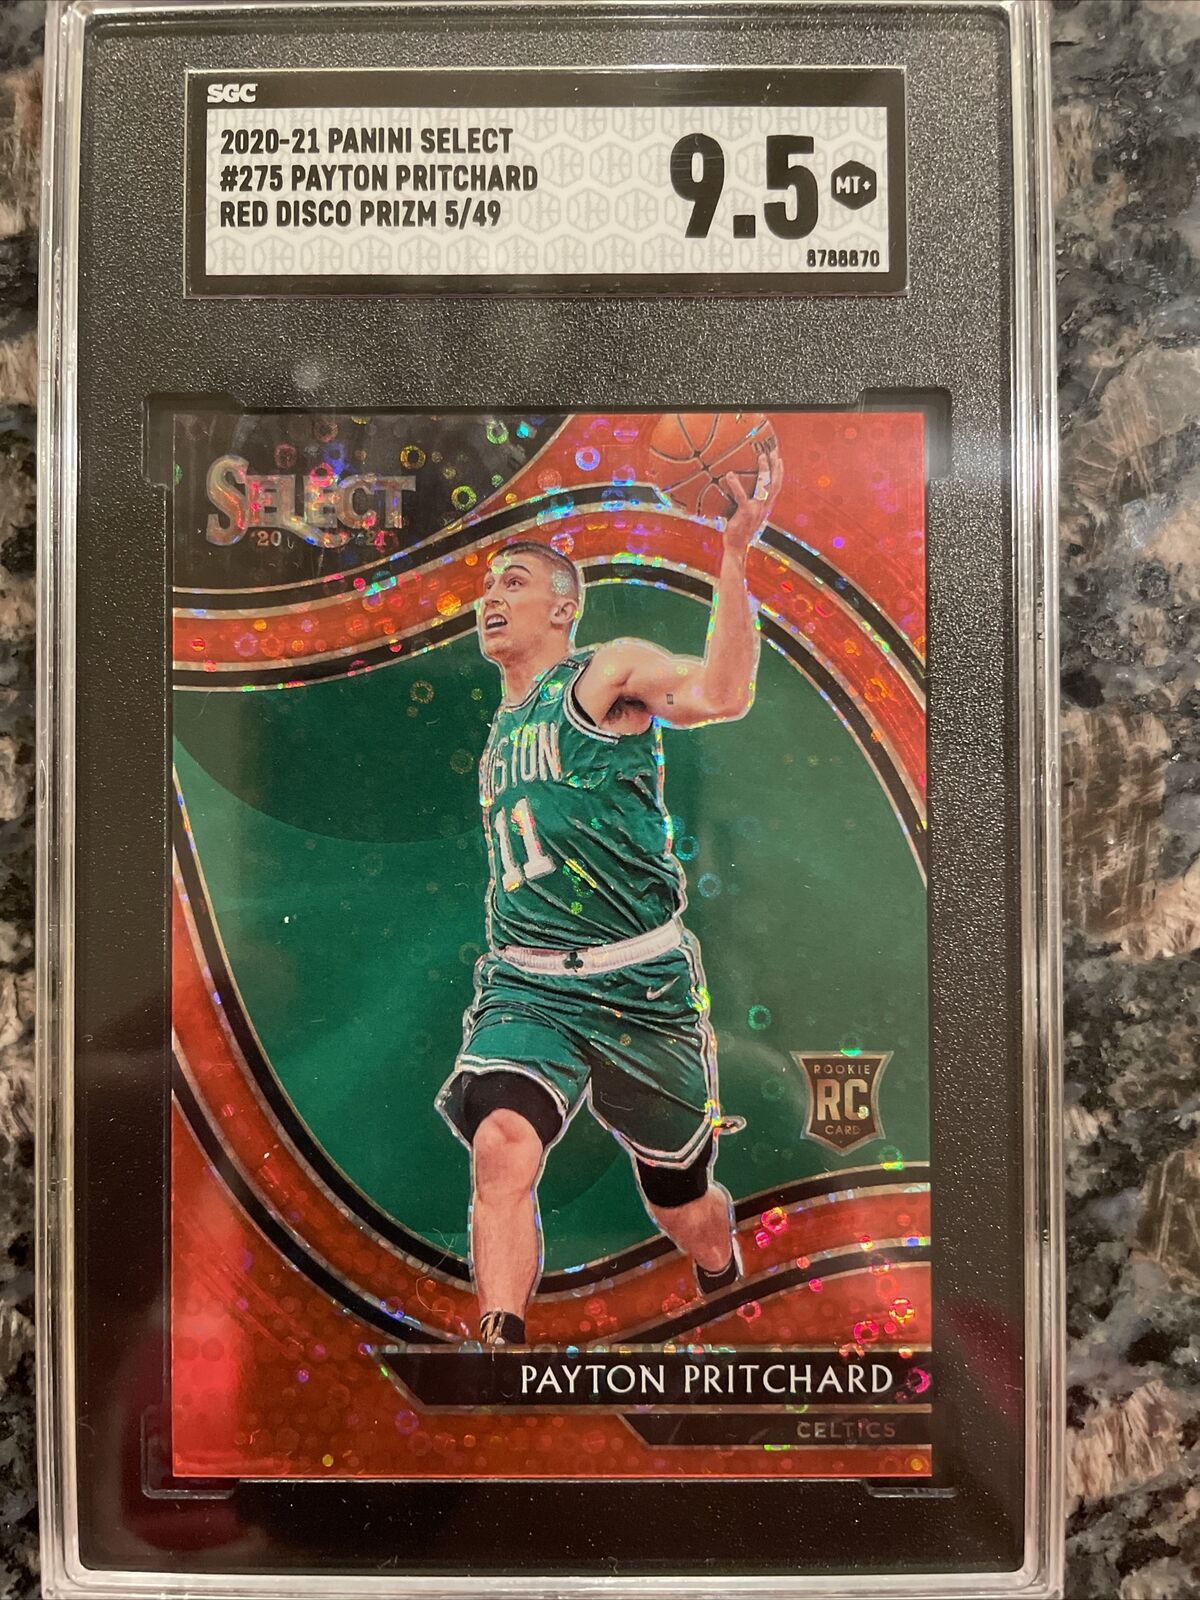 2020-21 Select Payton Pritchard Courtside Red Disco Rookie /49 SGC 9.5 RC POP 1 